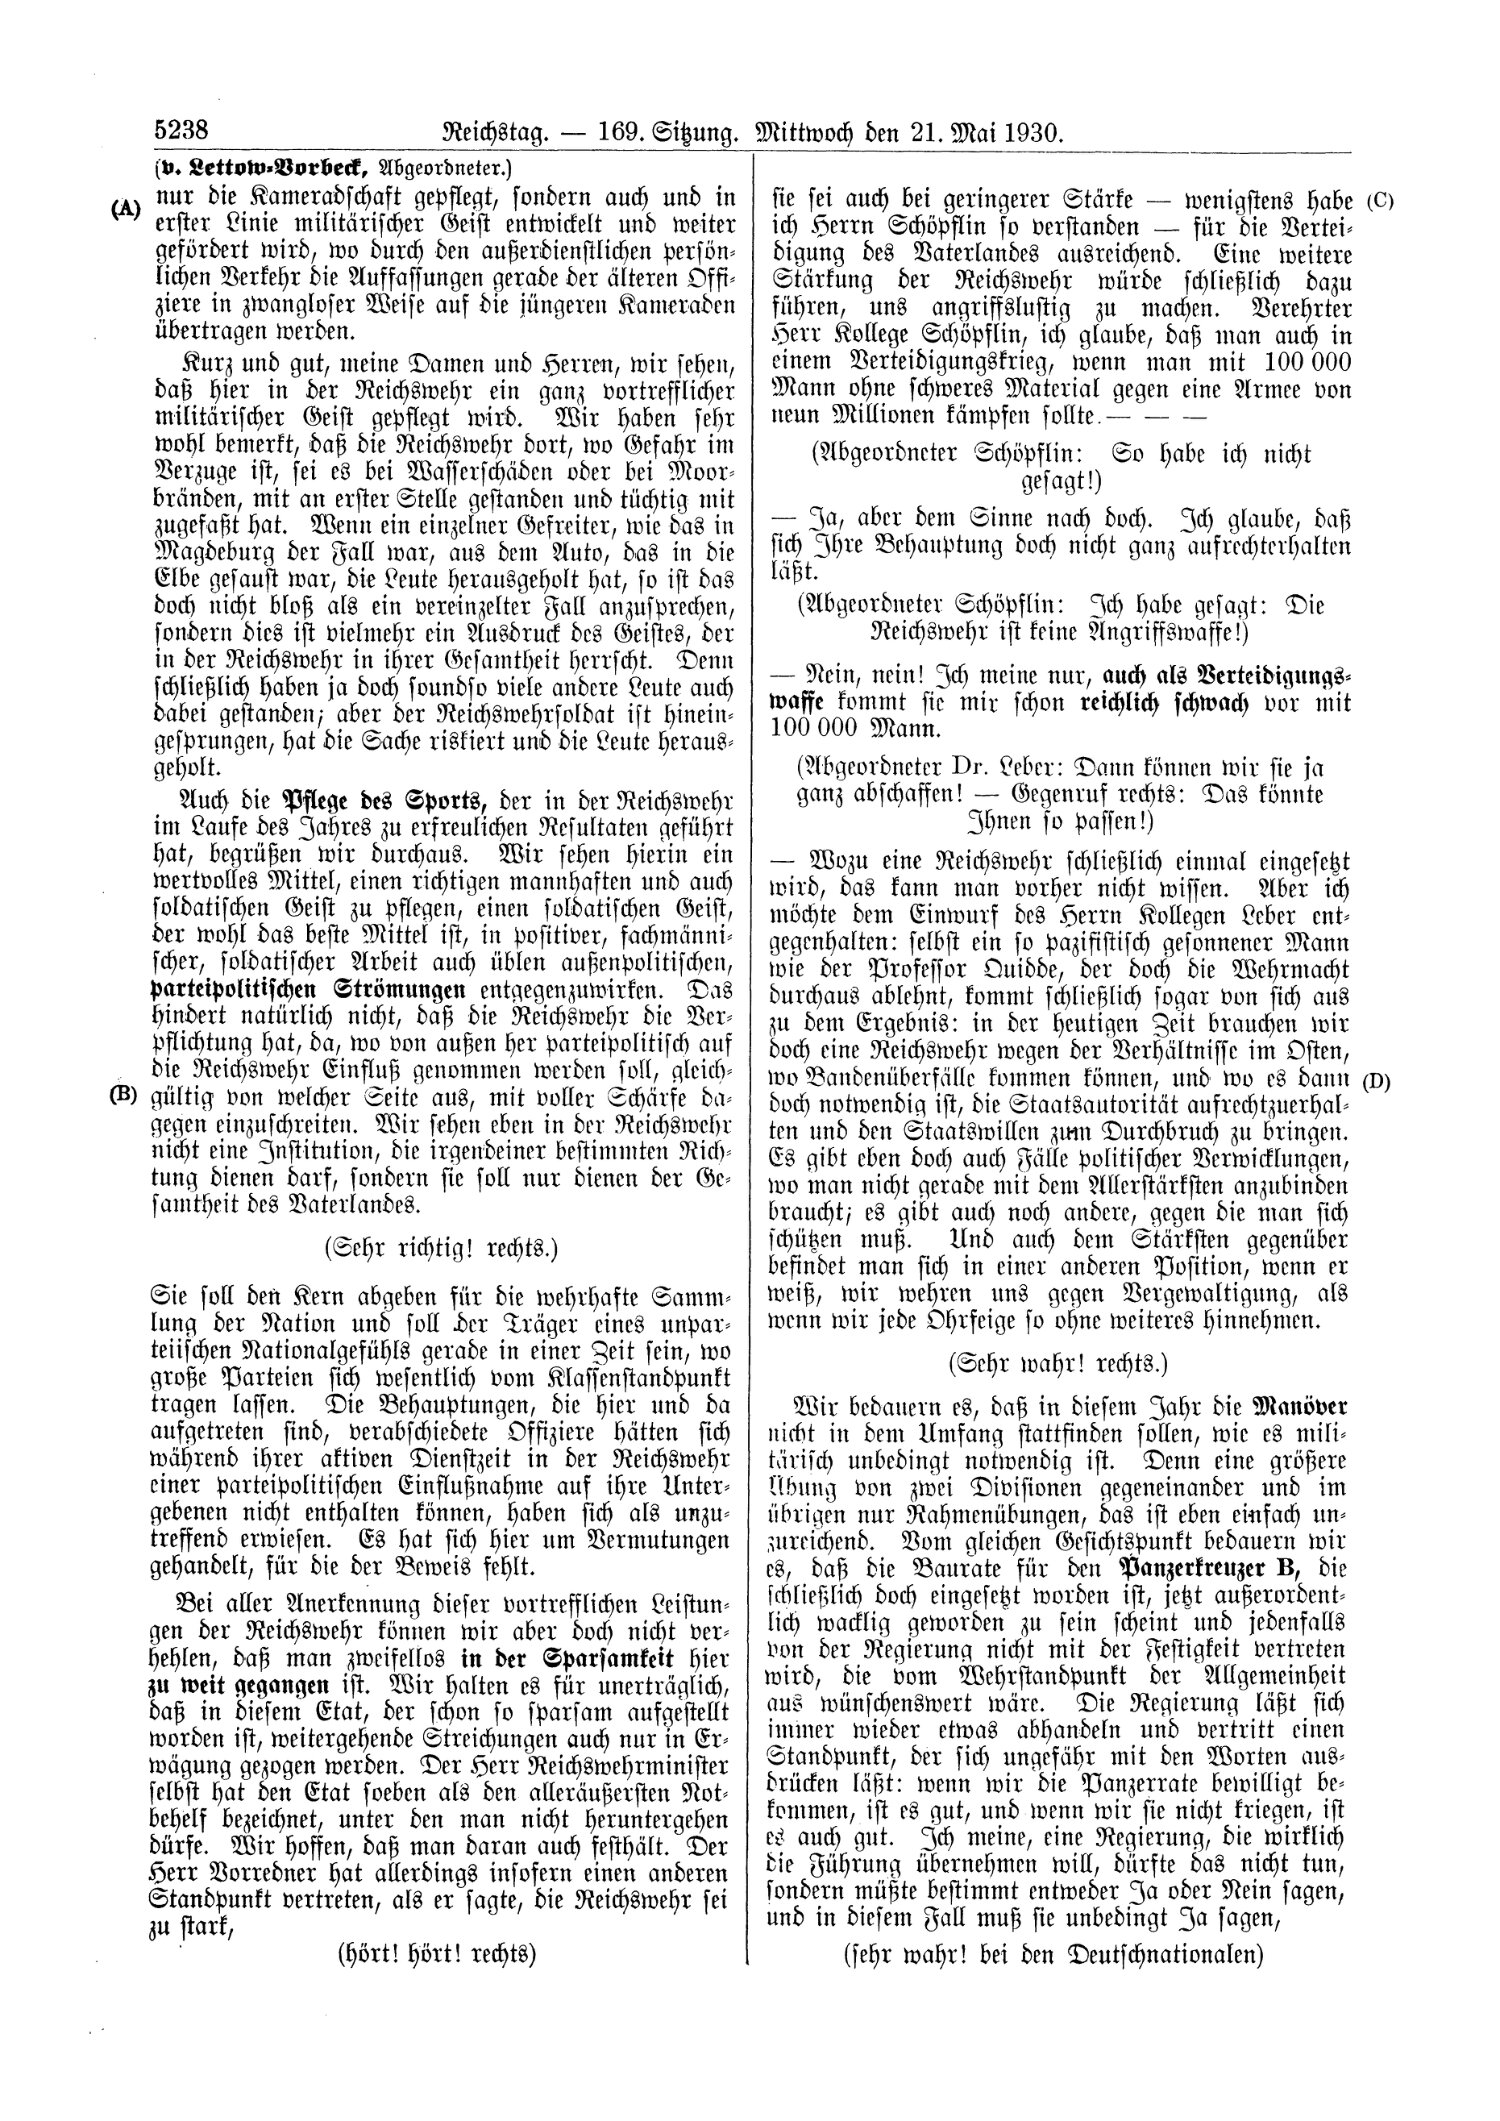 Scan of page 5238